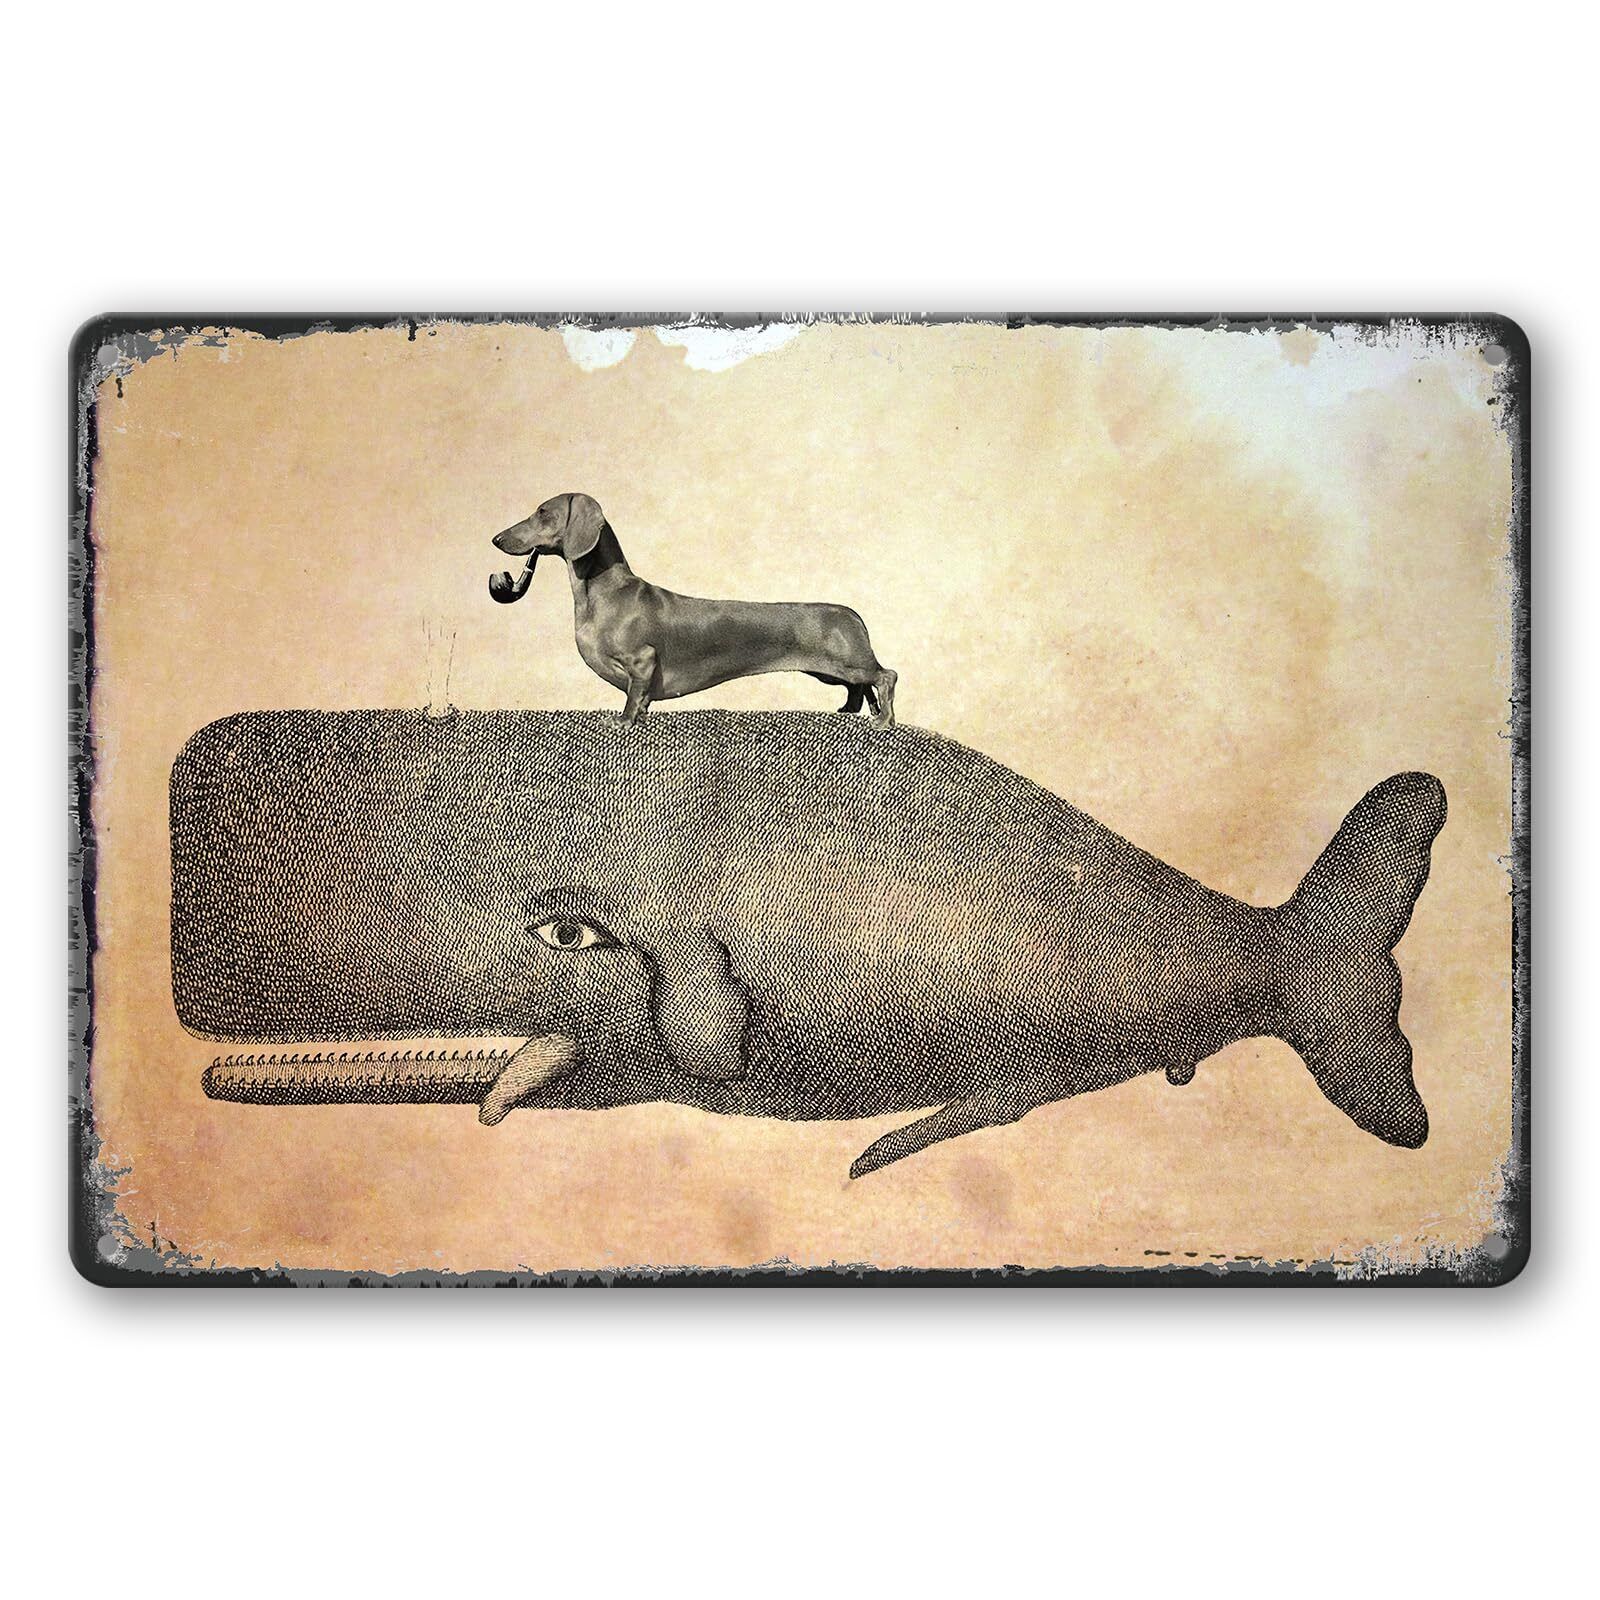 Vintage Dachshund Dog Riding Whale Metal Tin Sign Dachshund Gifts for Women Wi